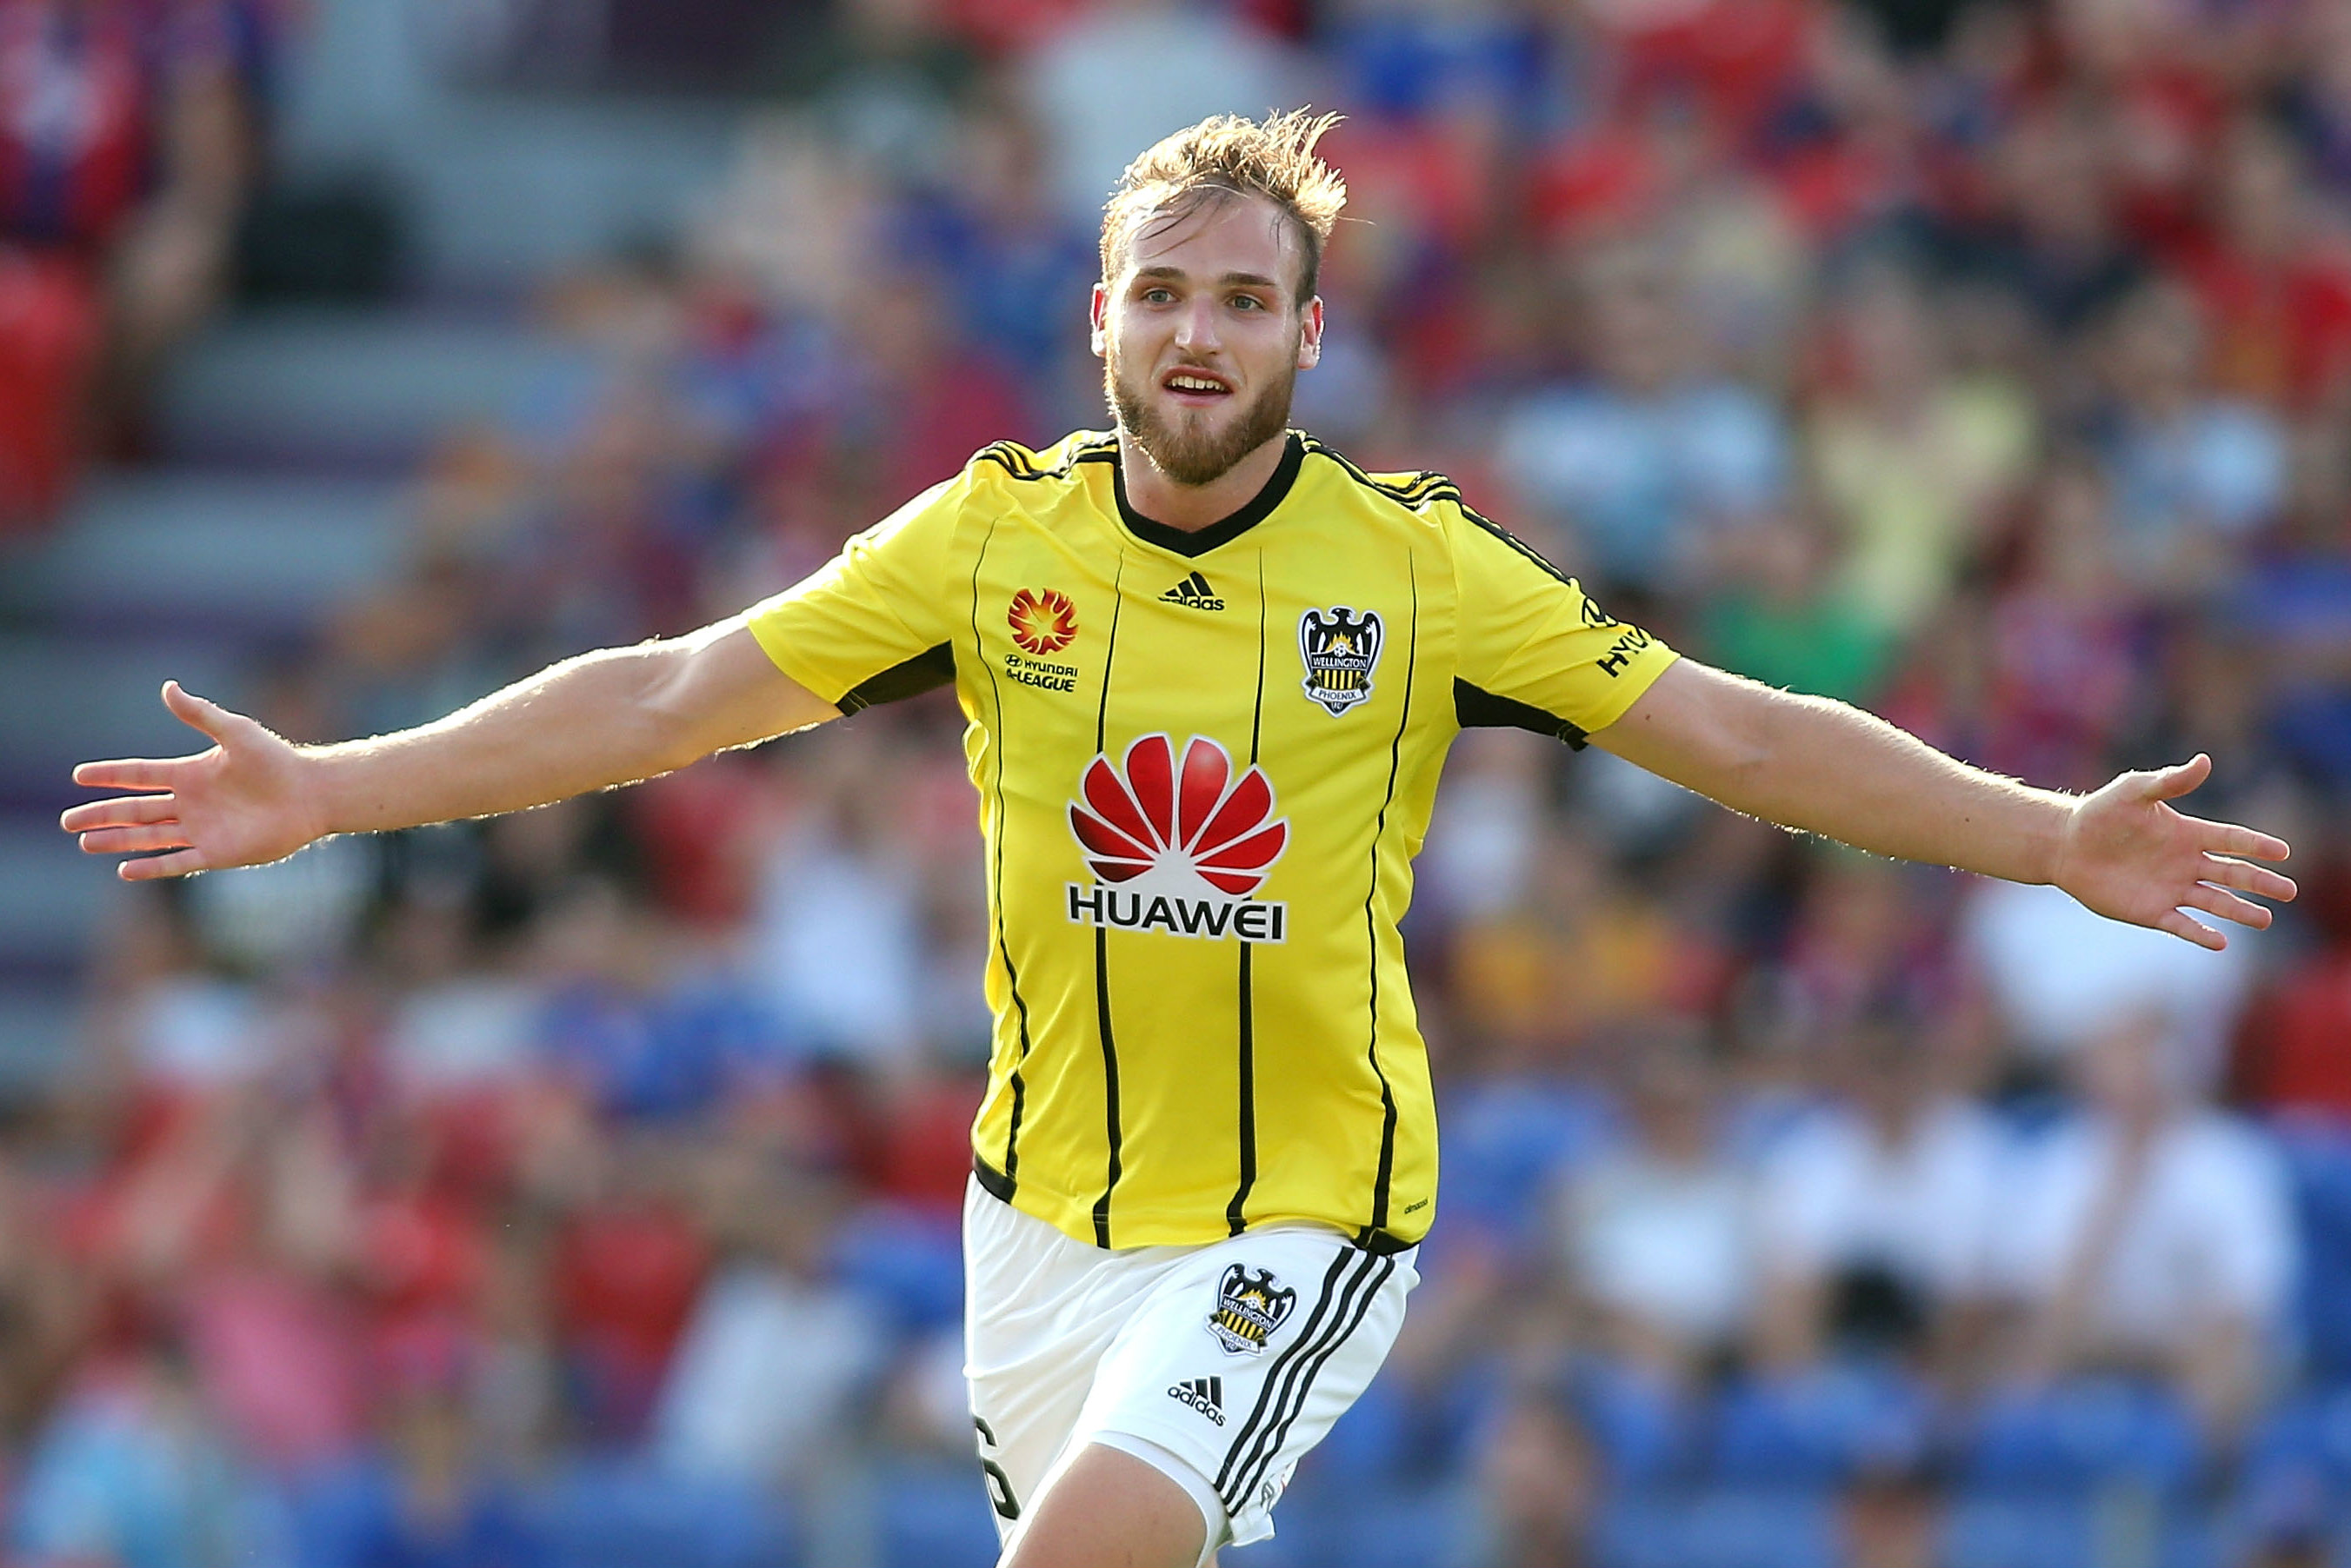 Hamish Watson scored six goals in 31 appearances in his last stint with Wellington Phoenix